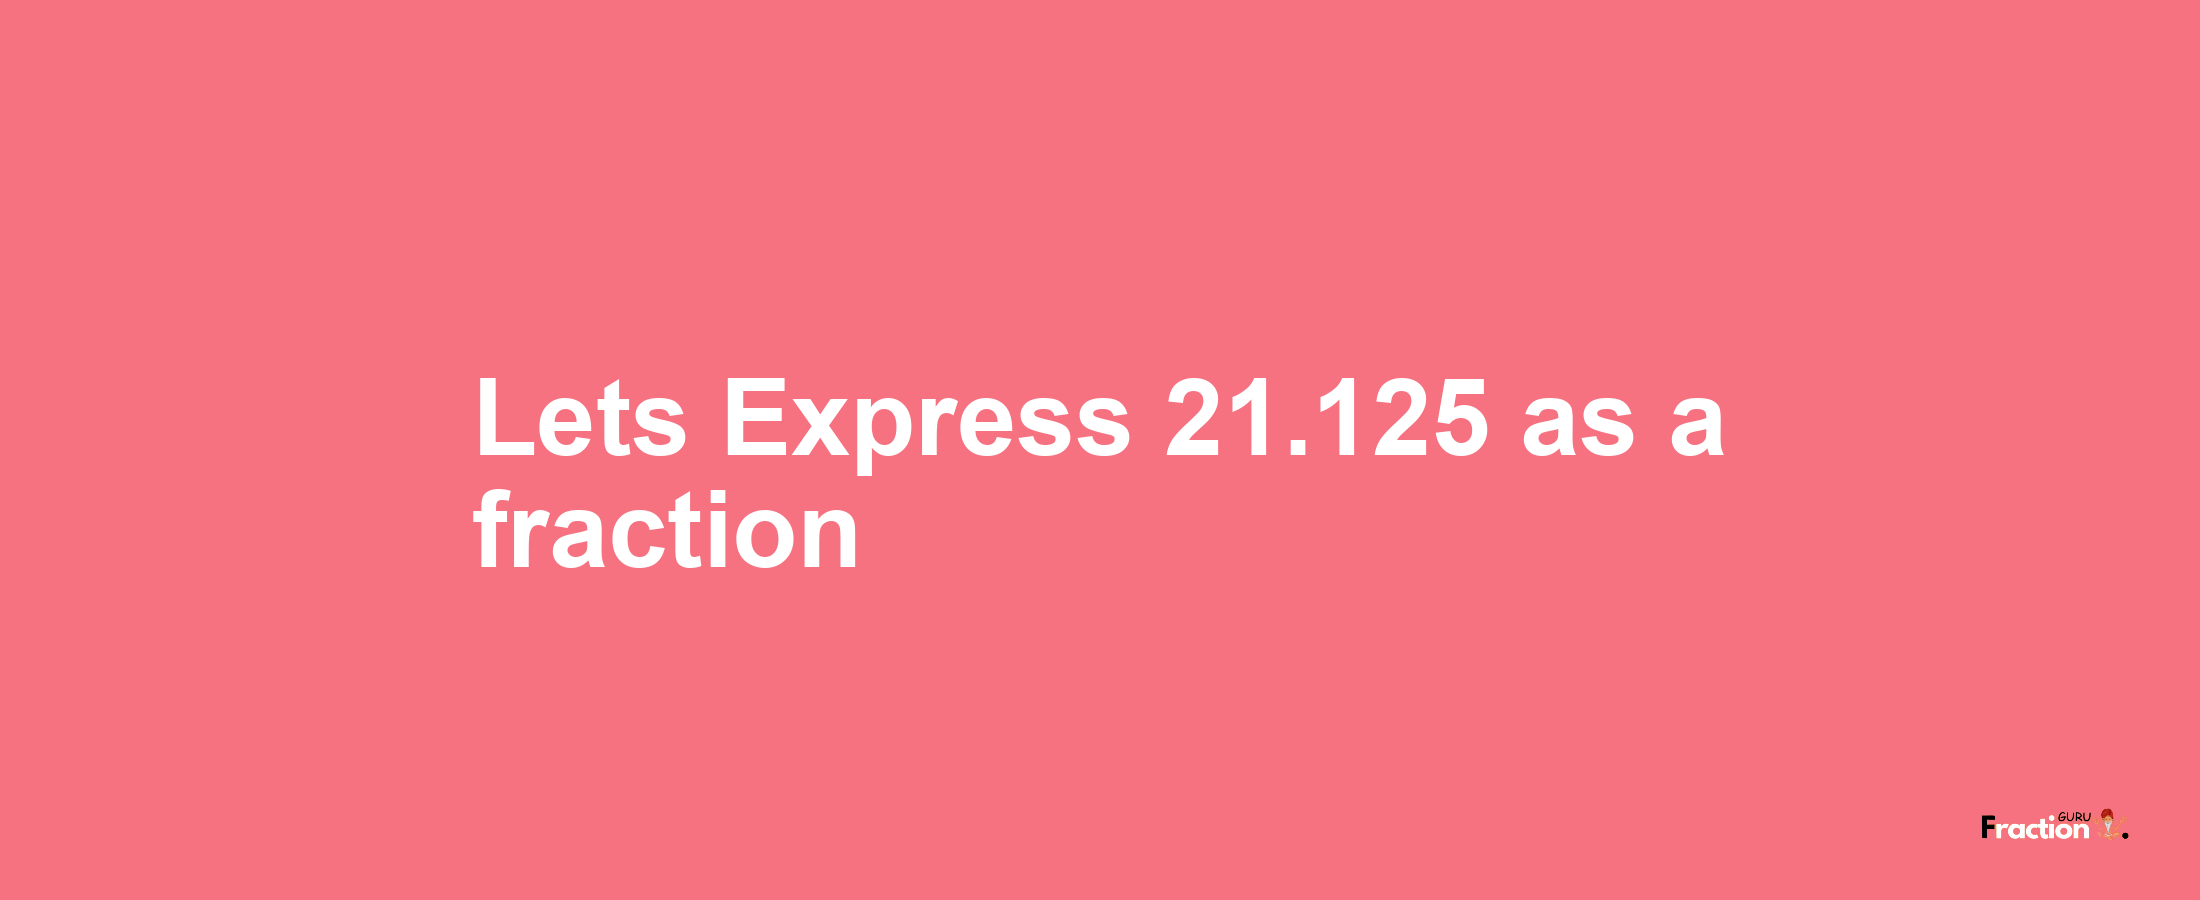 Lets Express 21.125 as afraction